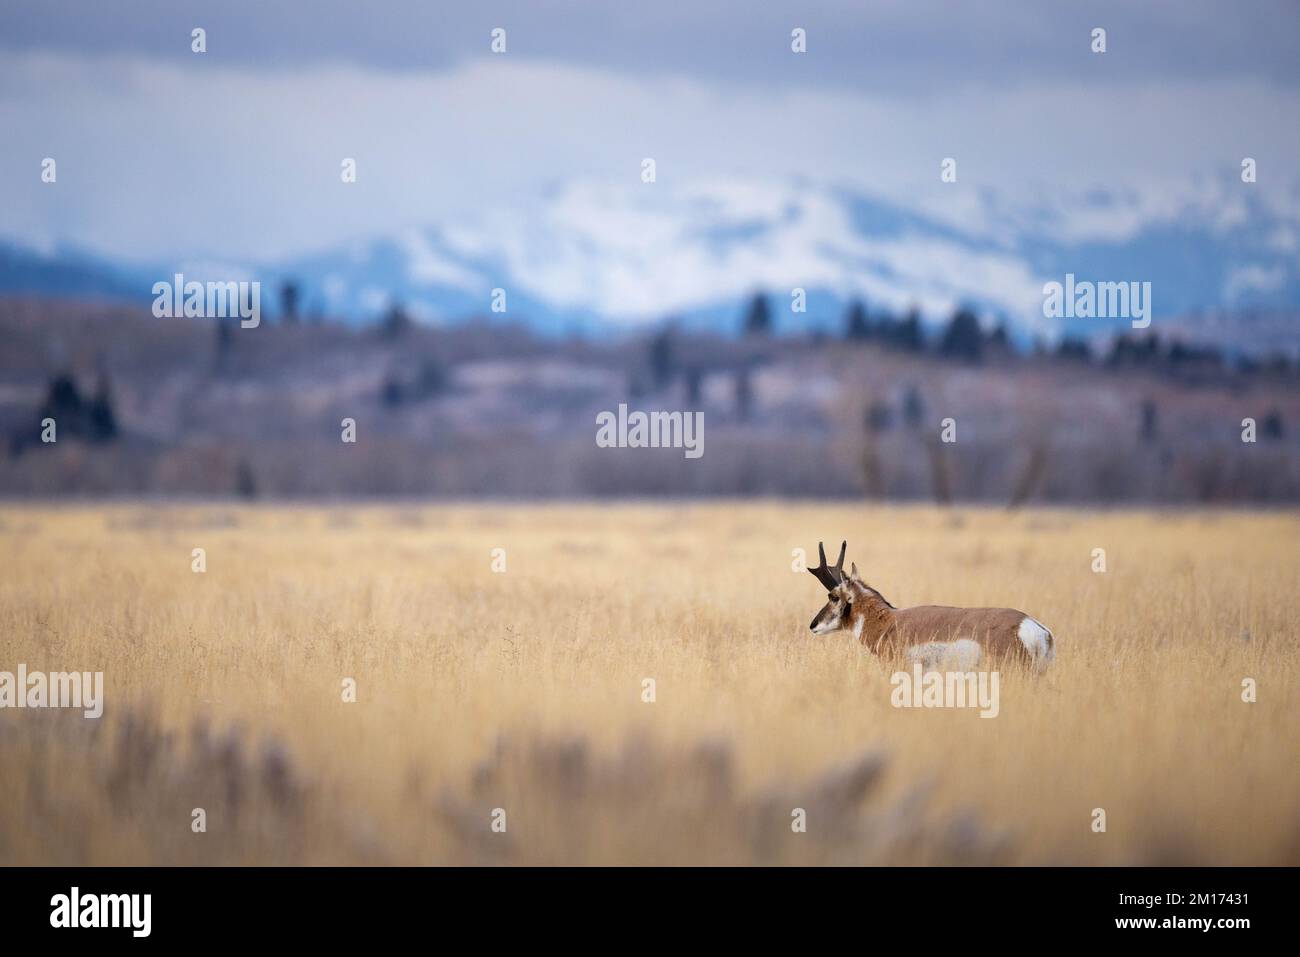 A pronghorn buck standing in grasses in Antelope Flats below snow-covered mountains. Grand Teton National Park, Wyoming Stock Photo